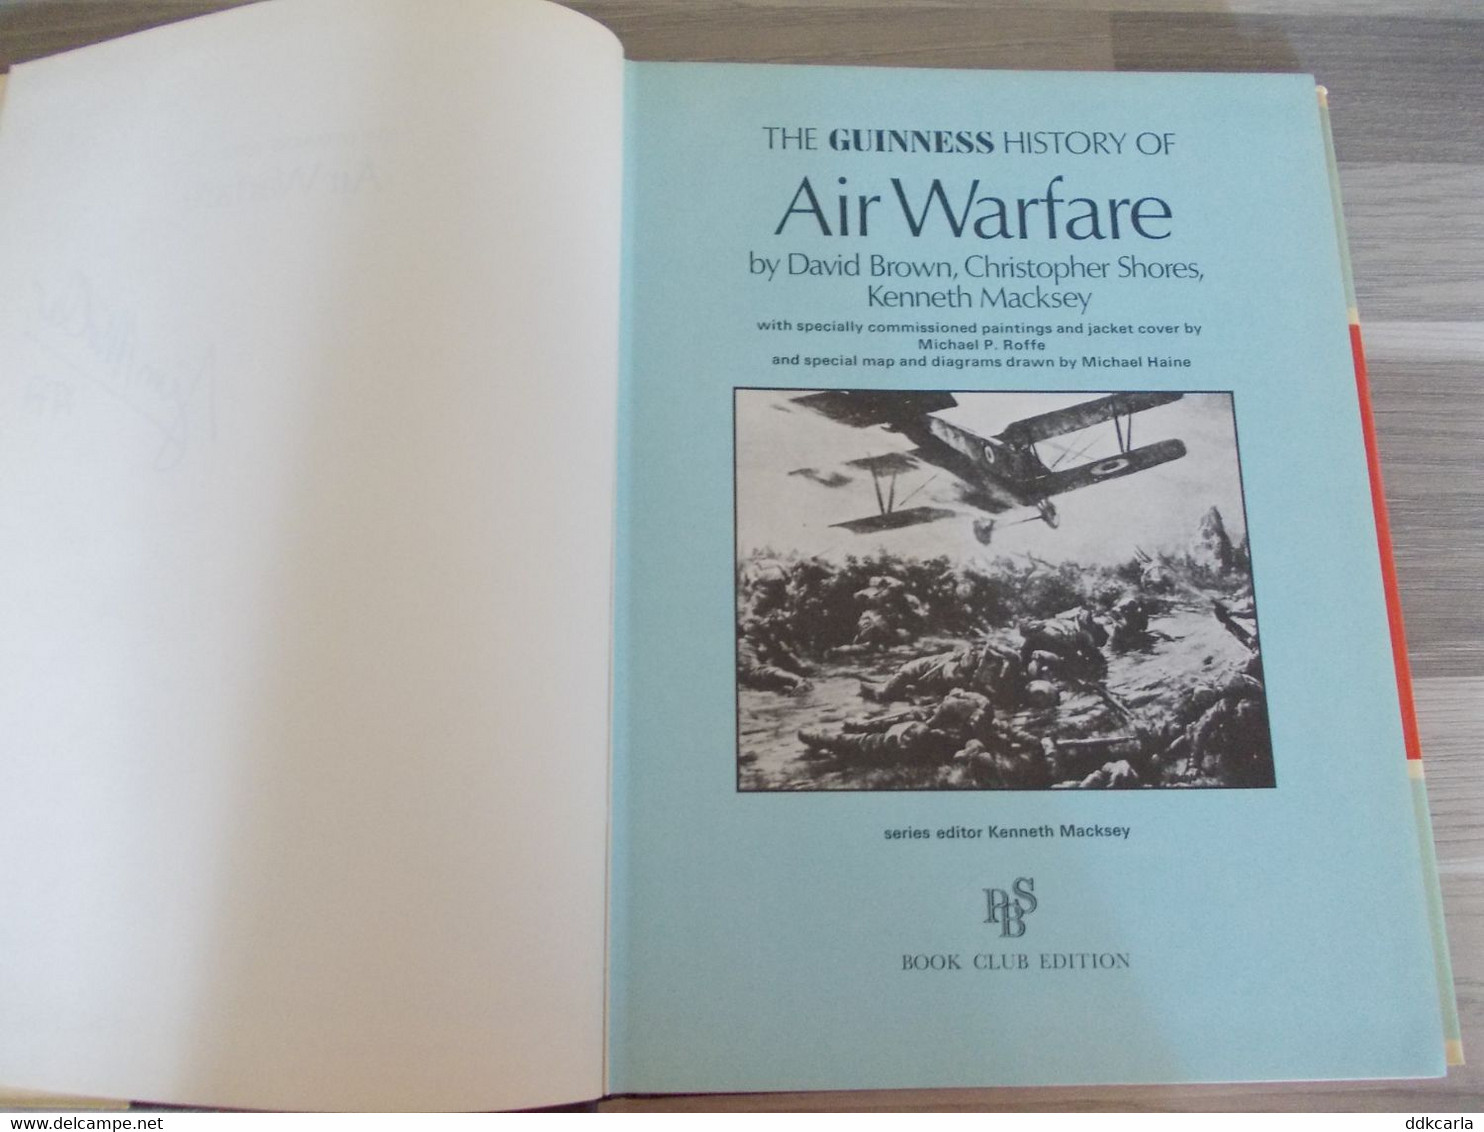 Boek - The Guinness History Of AIR WARFARE By David Brown, Christopher Shores & Kenneth Macksey - Weltkrieg 1914-18